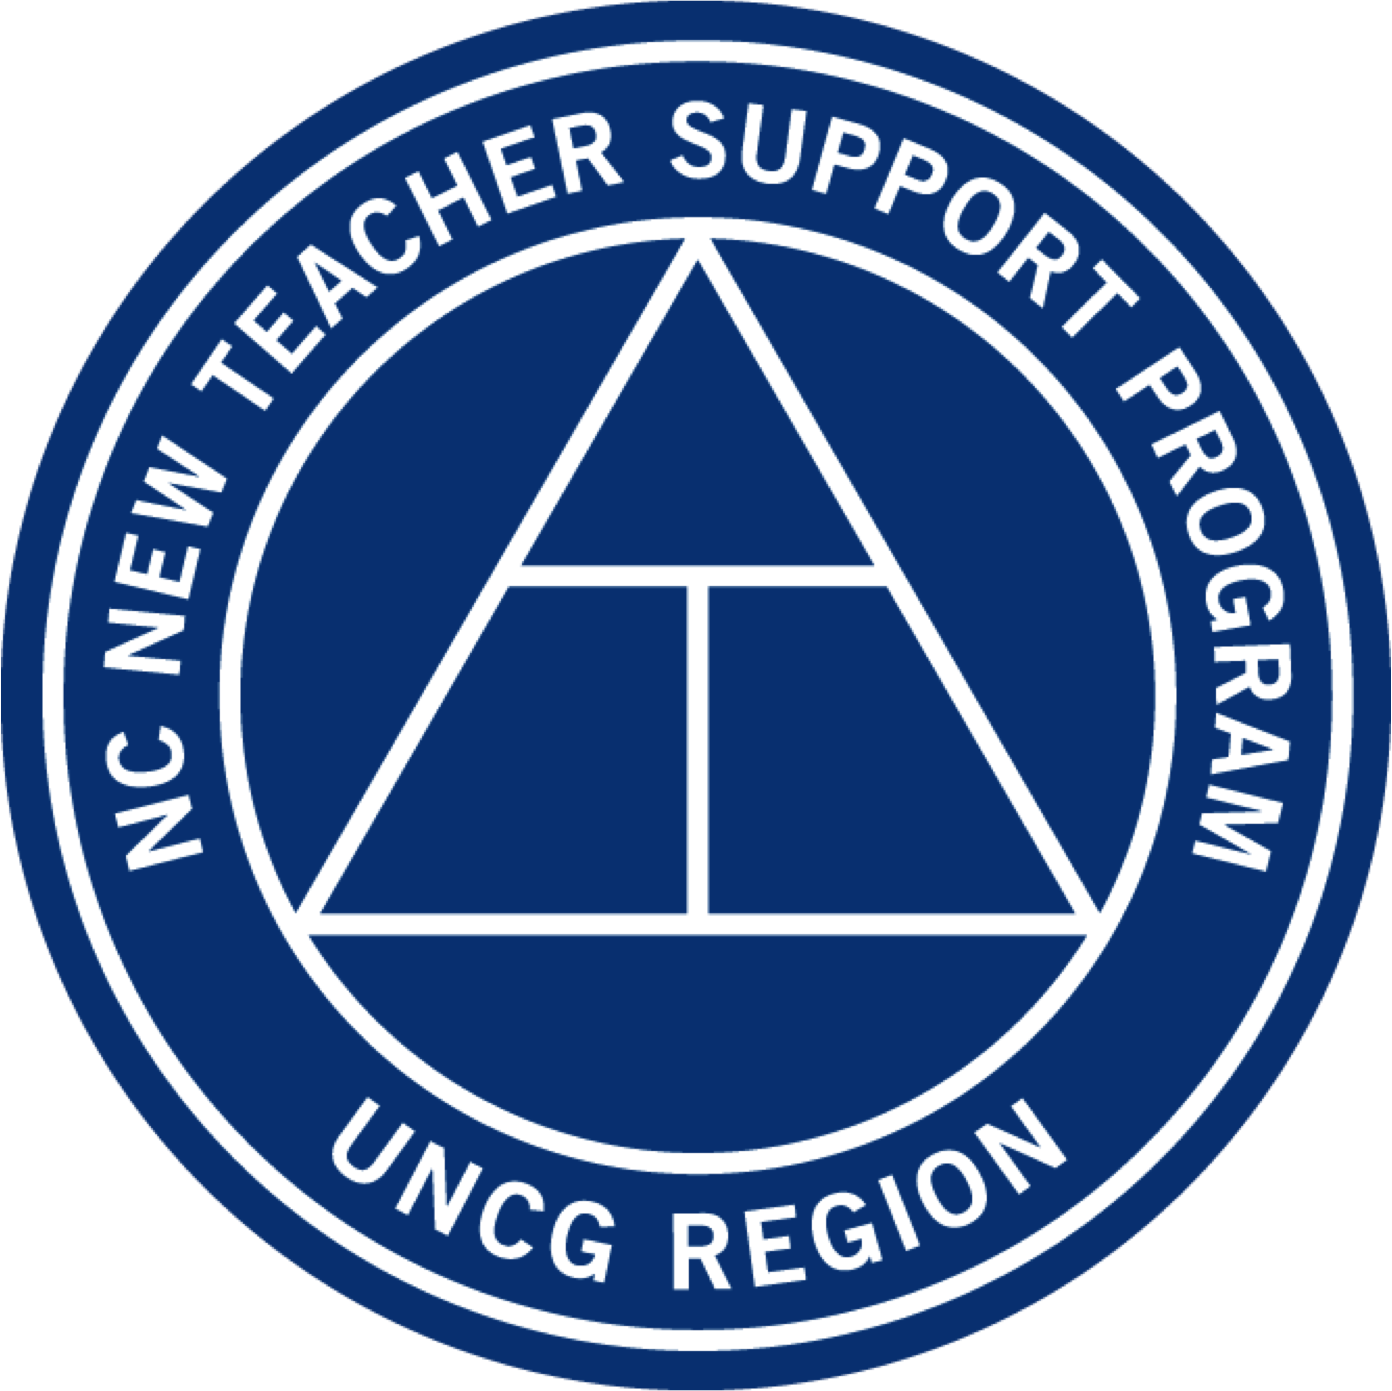 Nc New Teacher Support Program - Defense Security Cooperation Agency (1392x1391)